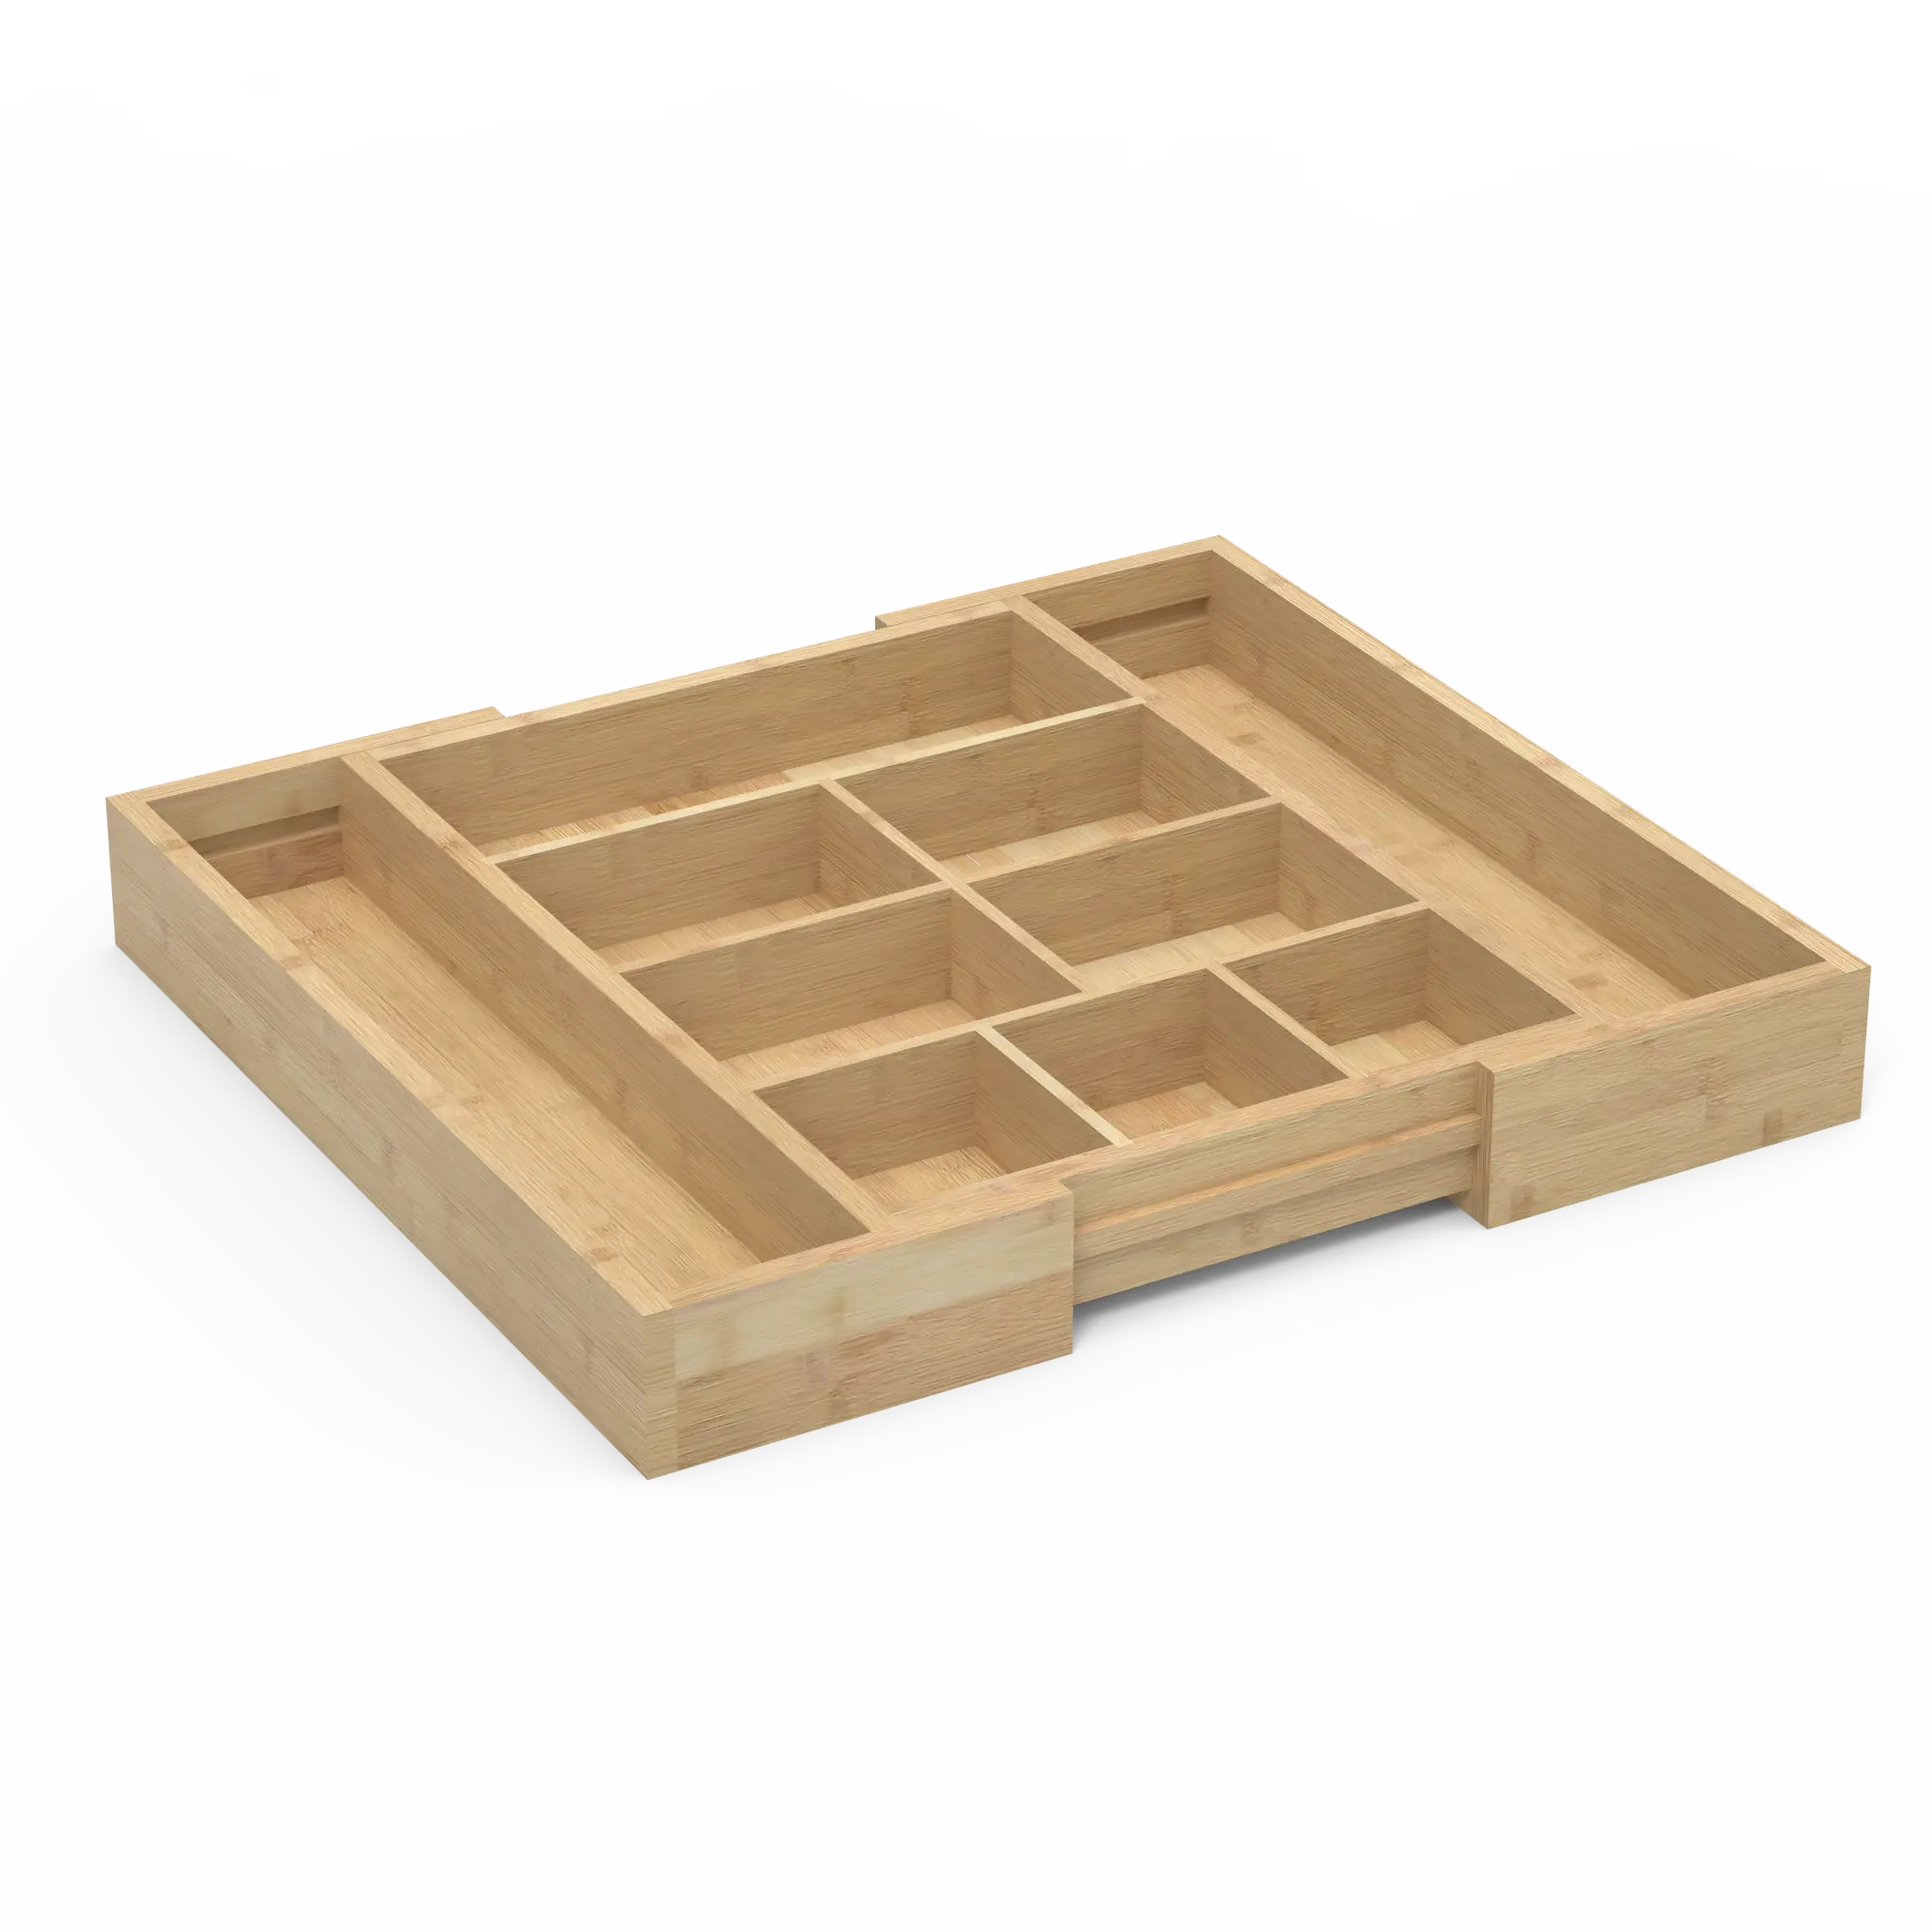 HOSTK Cutlery Tray for Kitchen Adjustable Bamboo Expandable Silverware Organizer with Removable Dividers